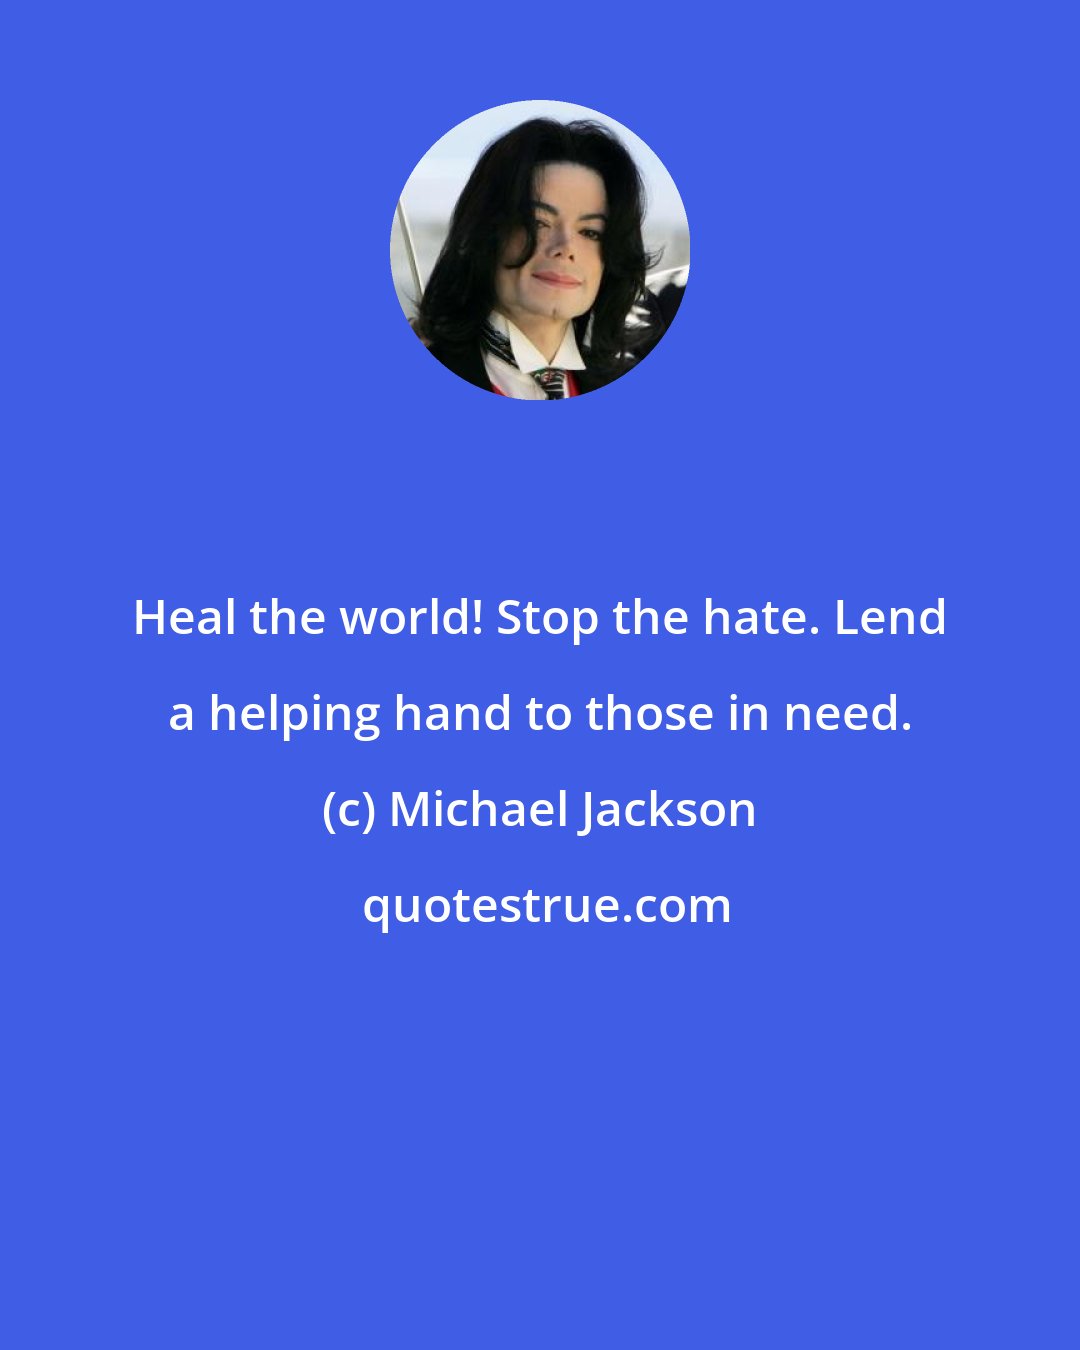 Michael Jackson: Heal the world! Stop the hate. Lend a helping hand to those in need.